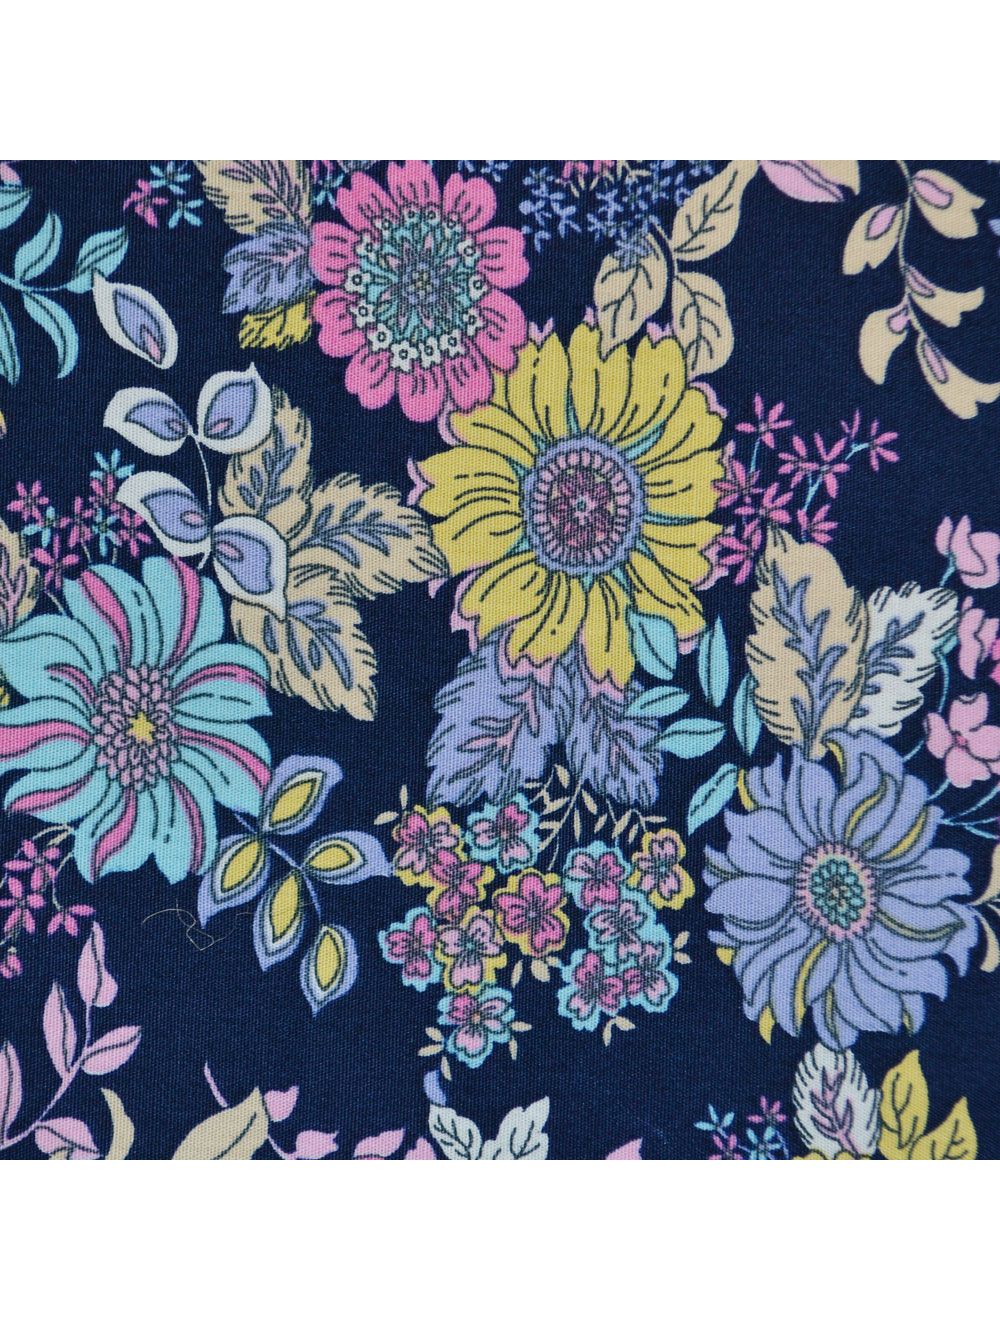 10 Metres Navy & Blue Forest Floral Printed 100% Cotton Poplin Fabric. 